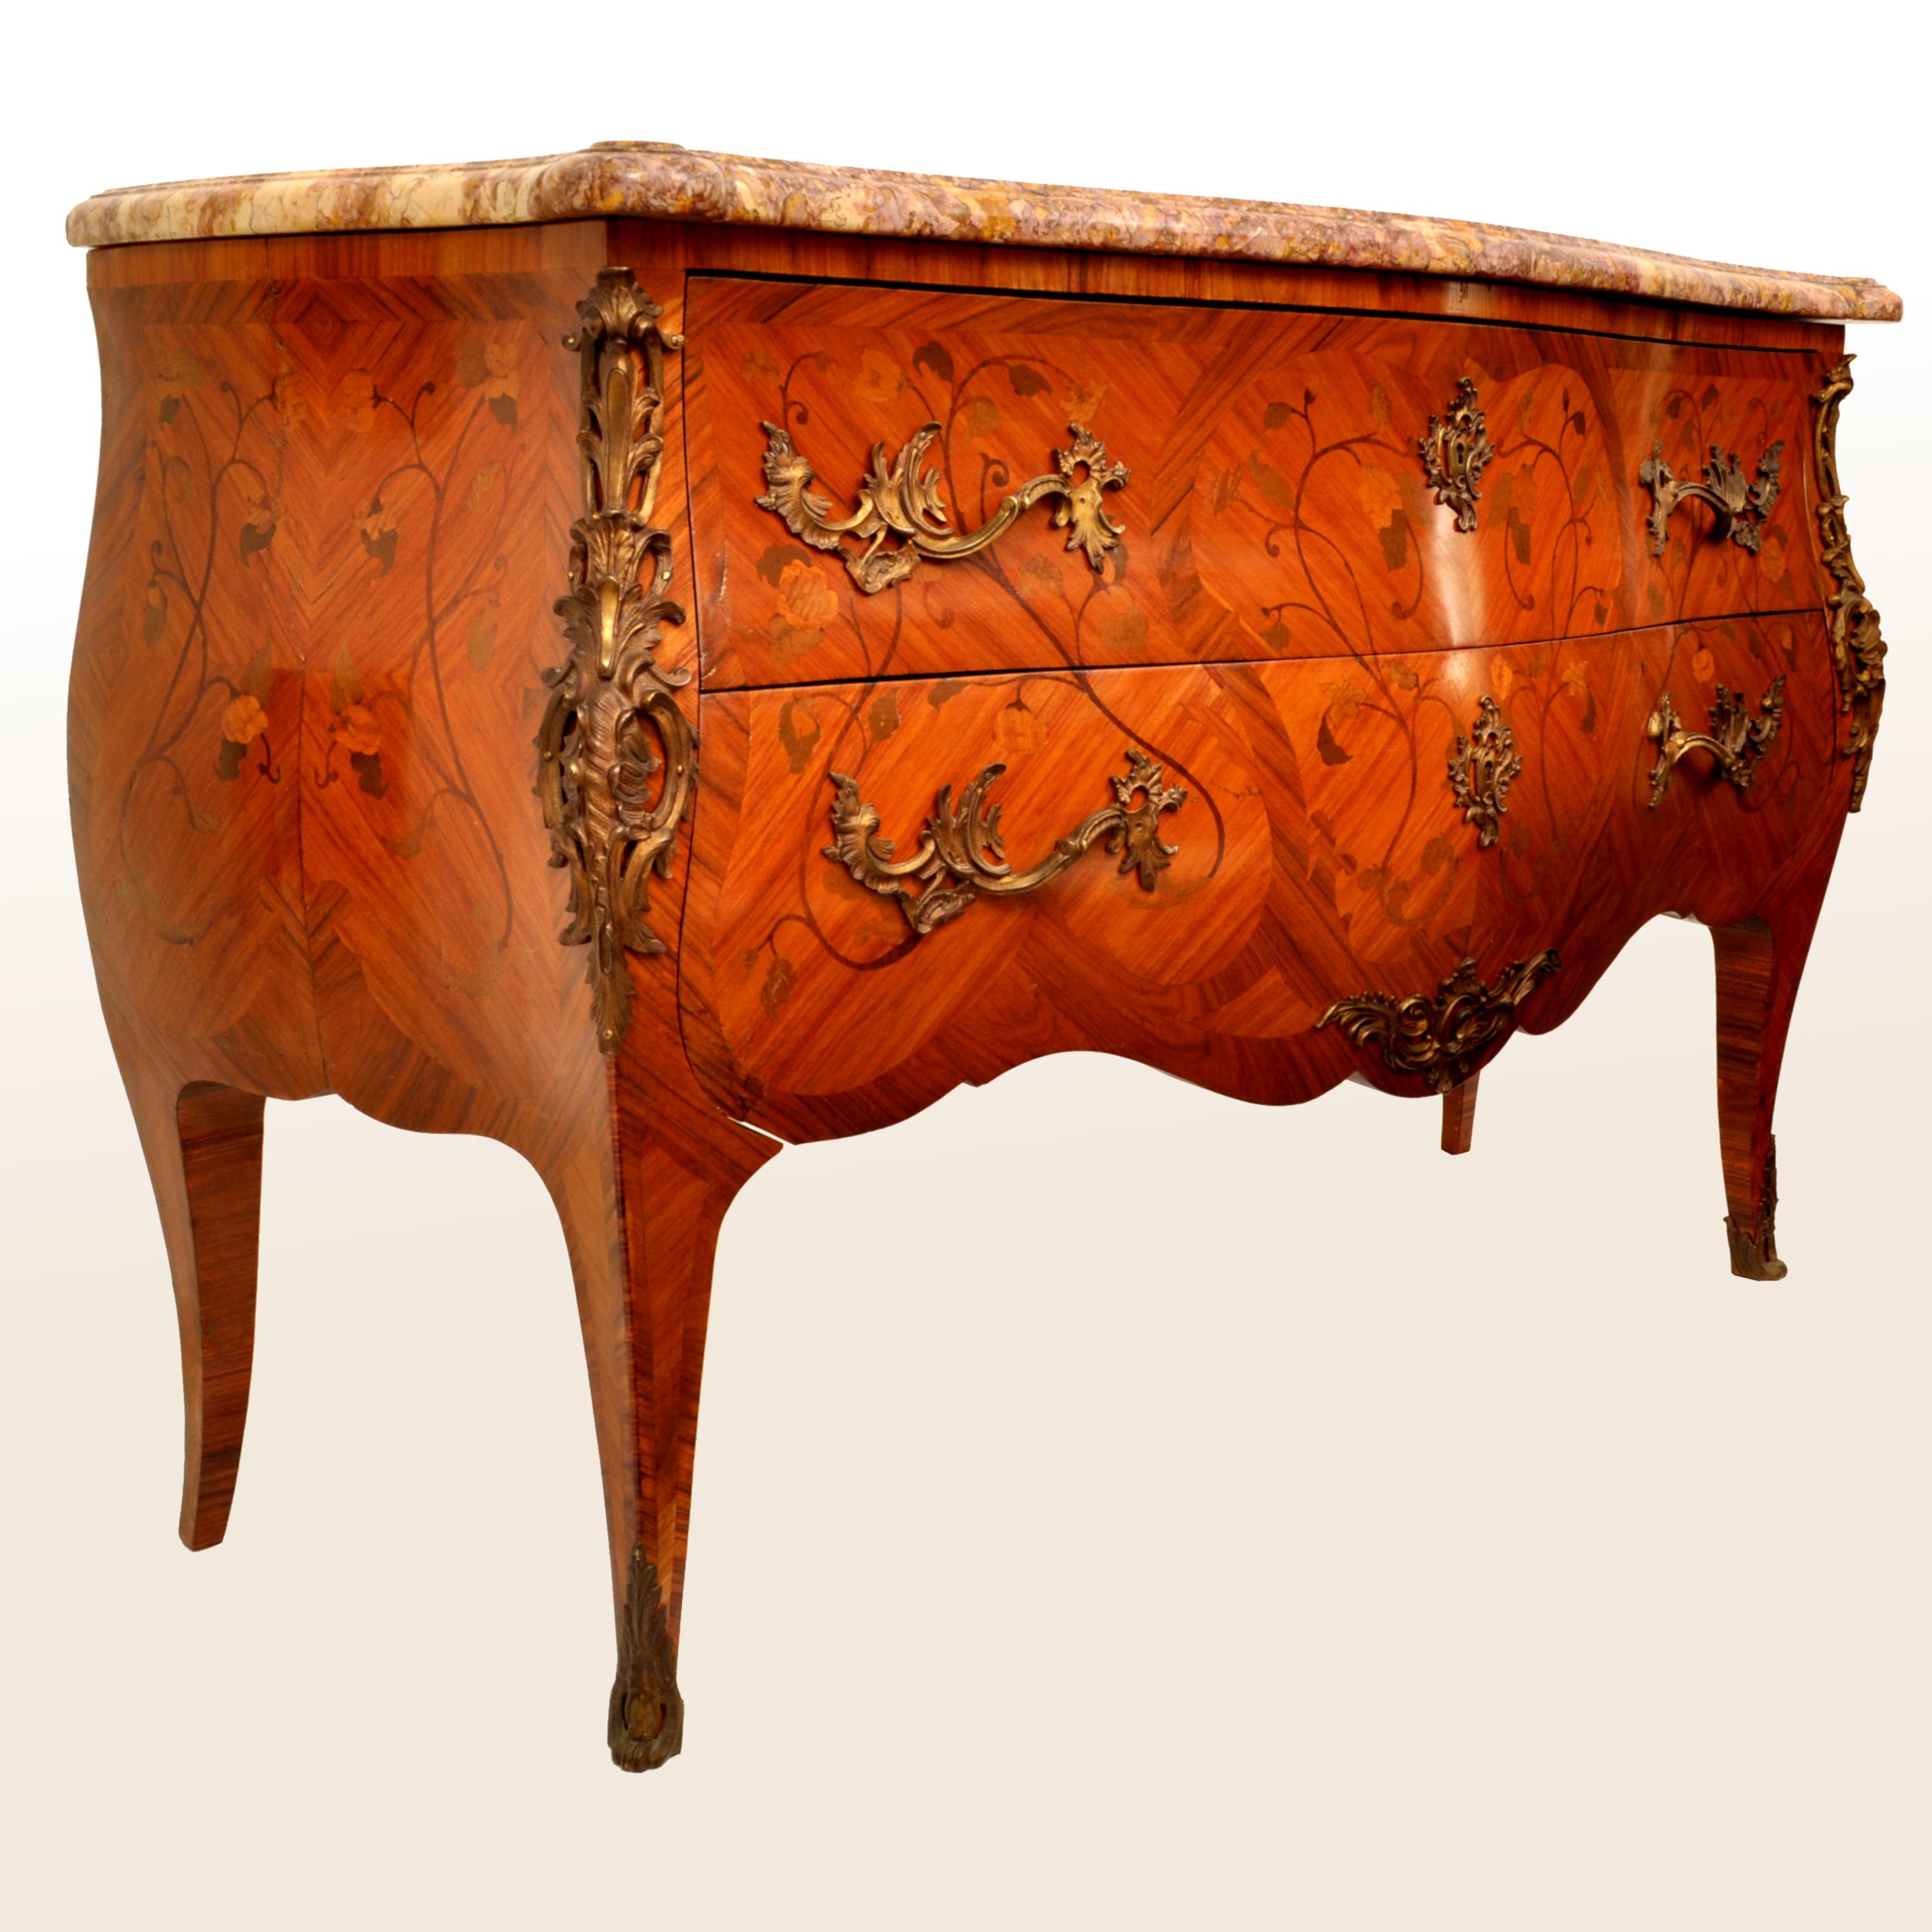 Gilt Antique 19th Century French Louis XV Inlaid Marquetry Bombe Commode Chest 1880